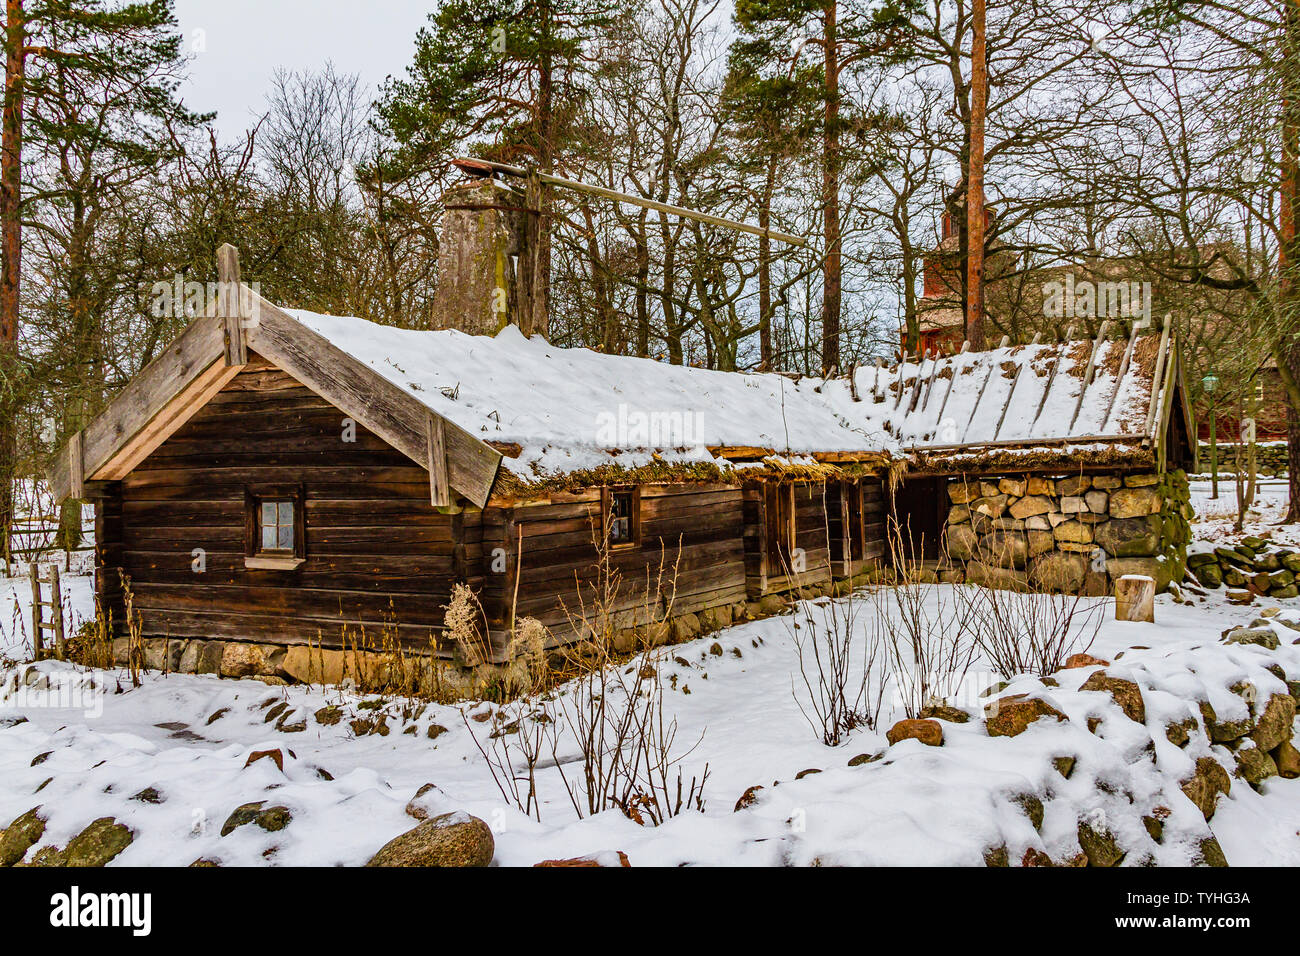 A traditional Swedish rural house in Skansen open-air museum, Stockholm, Sweden. January 2019. Stock Photo